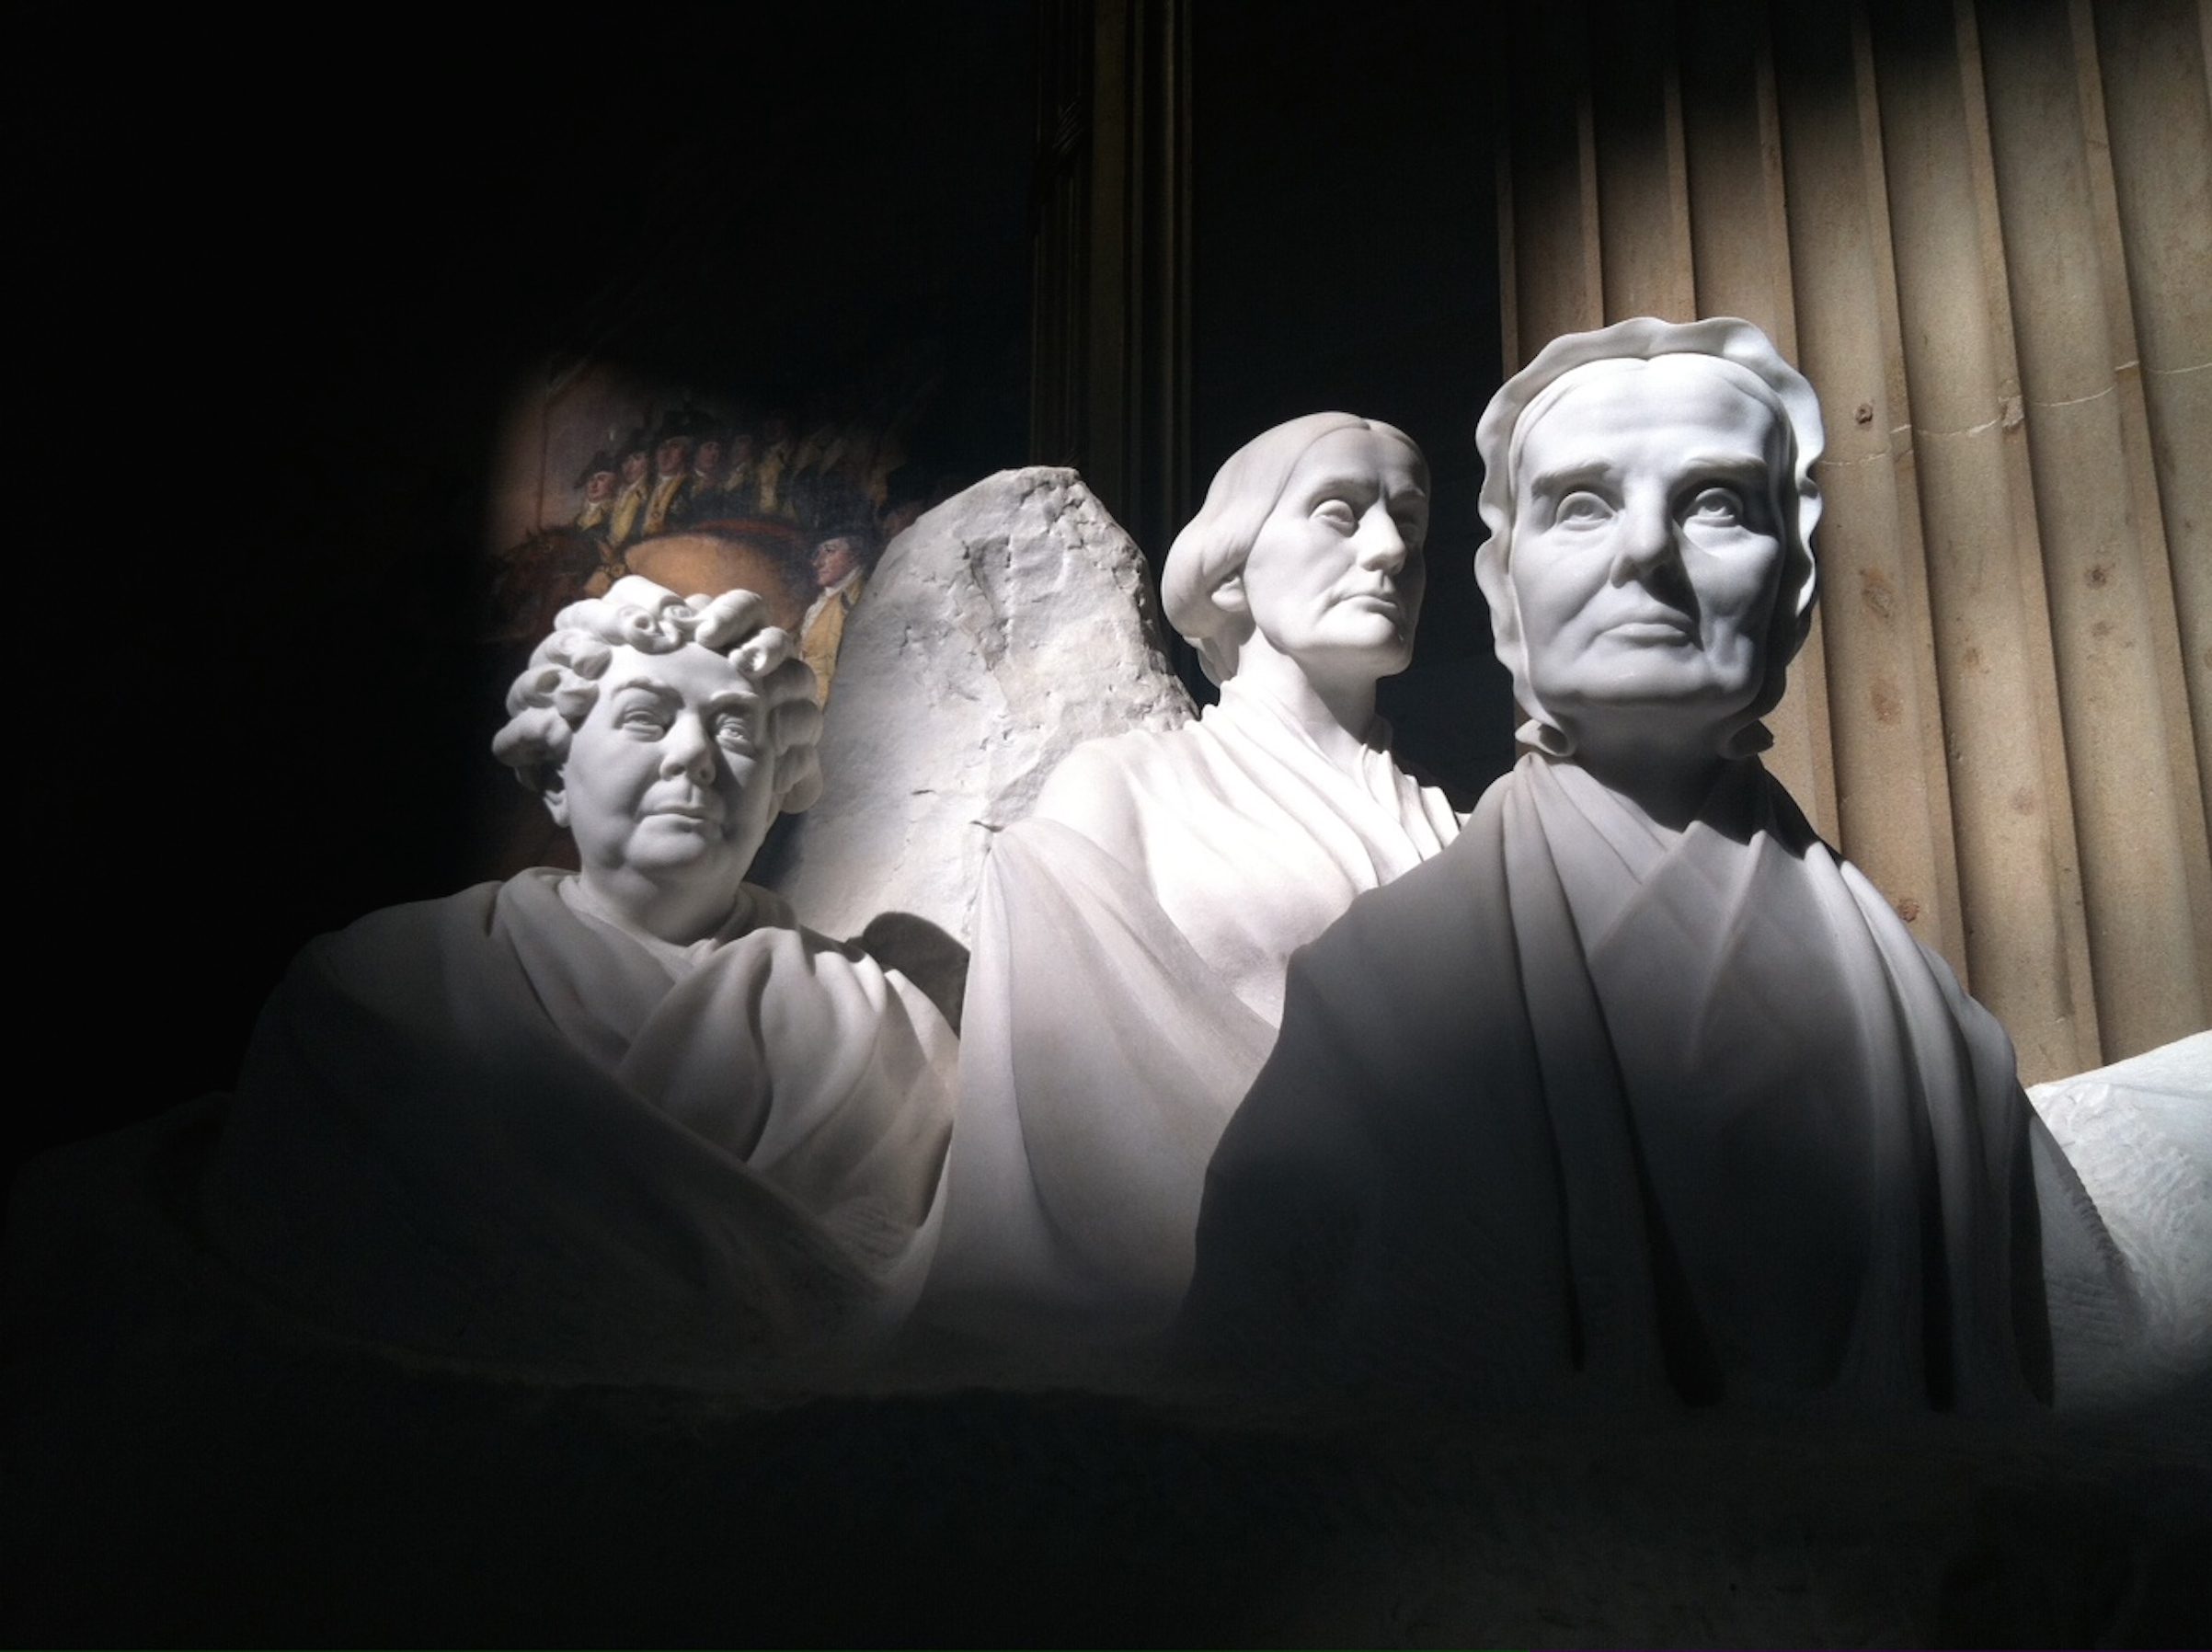 Statues of US  pioneers for women's suffrage,  Elizabeth Cady Stanton (L), Susan B. Anthony (C), and Lucretia Mott (R) are seen Sept. 30, 2013 in the US Capitol Rotunda in Washington, DC. (Michael Mathes—AFP/Getty Images)